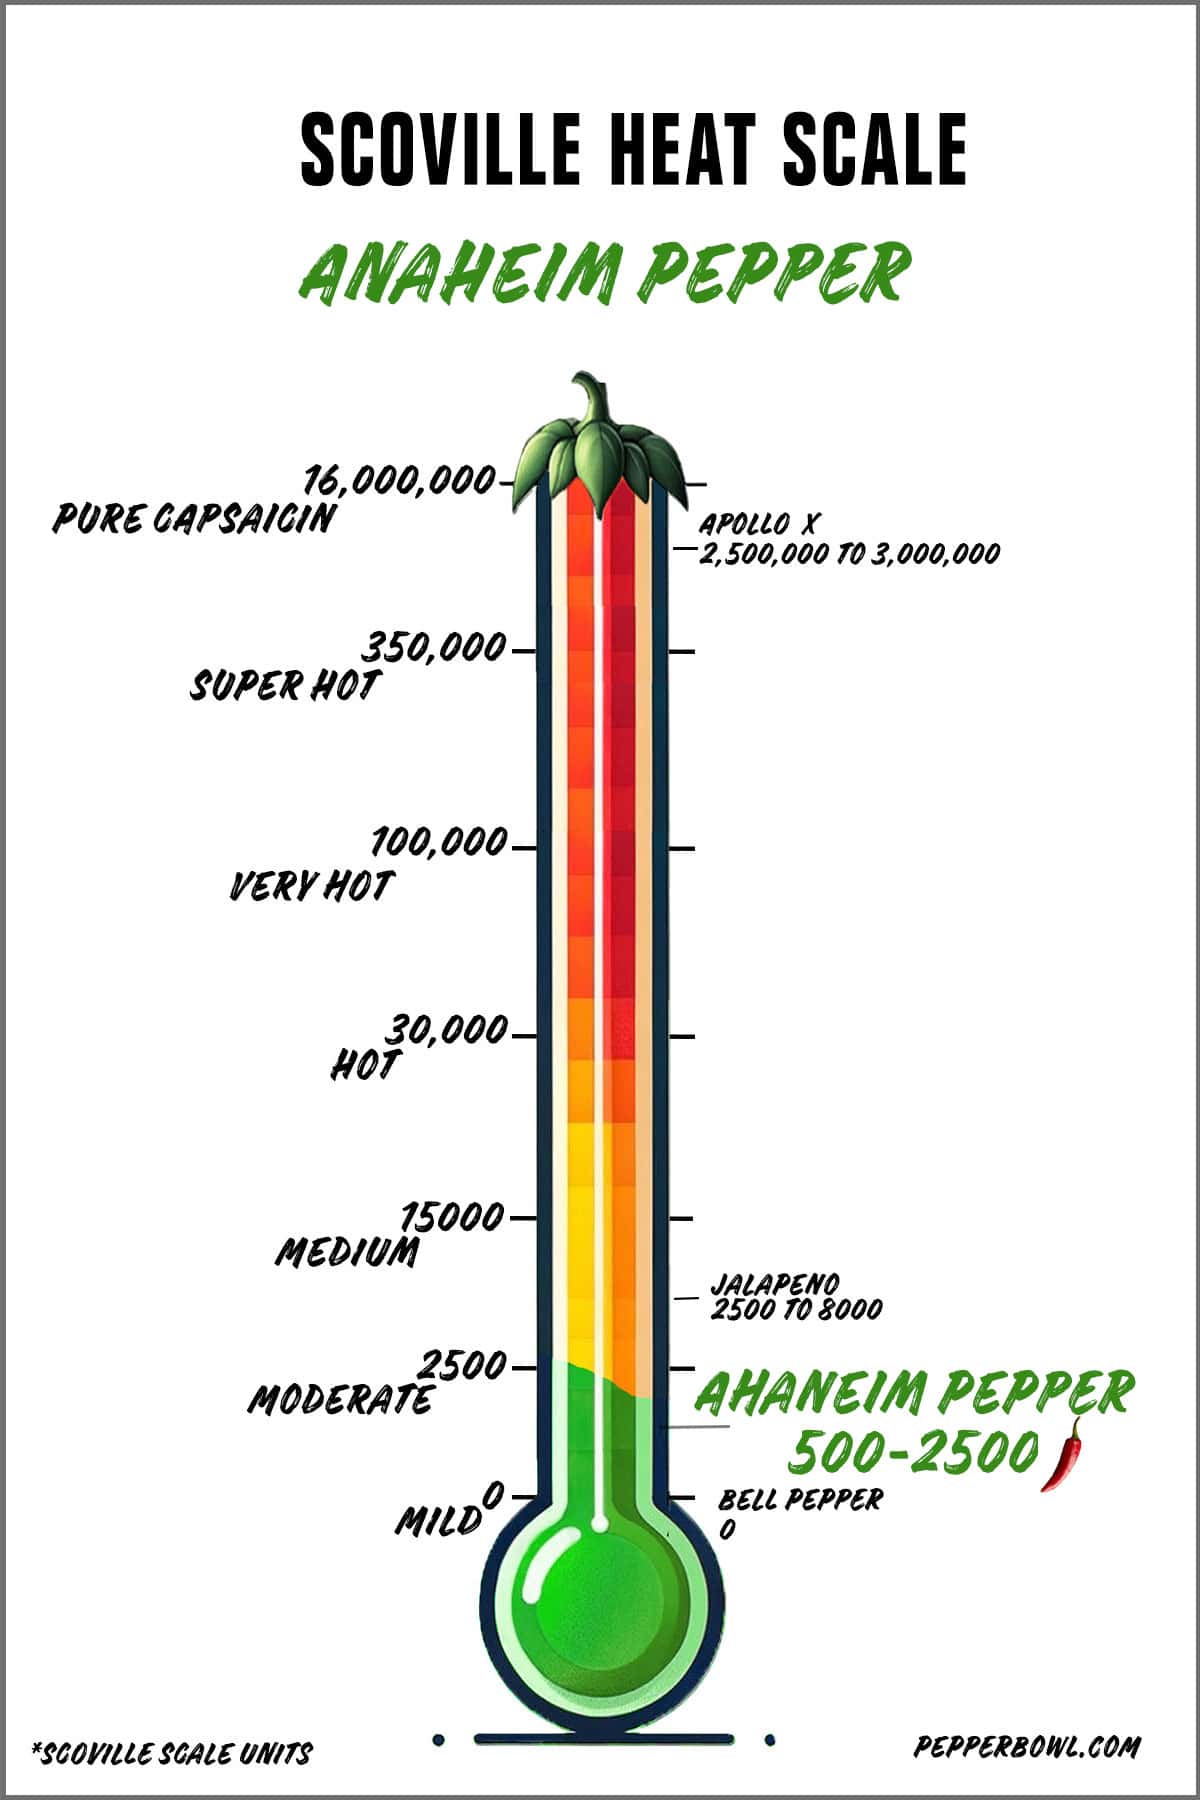 Illustration of the anaheim pepper in the Scoville scale, representing its heat intensity.